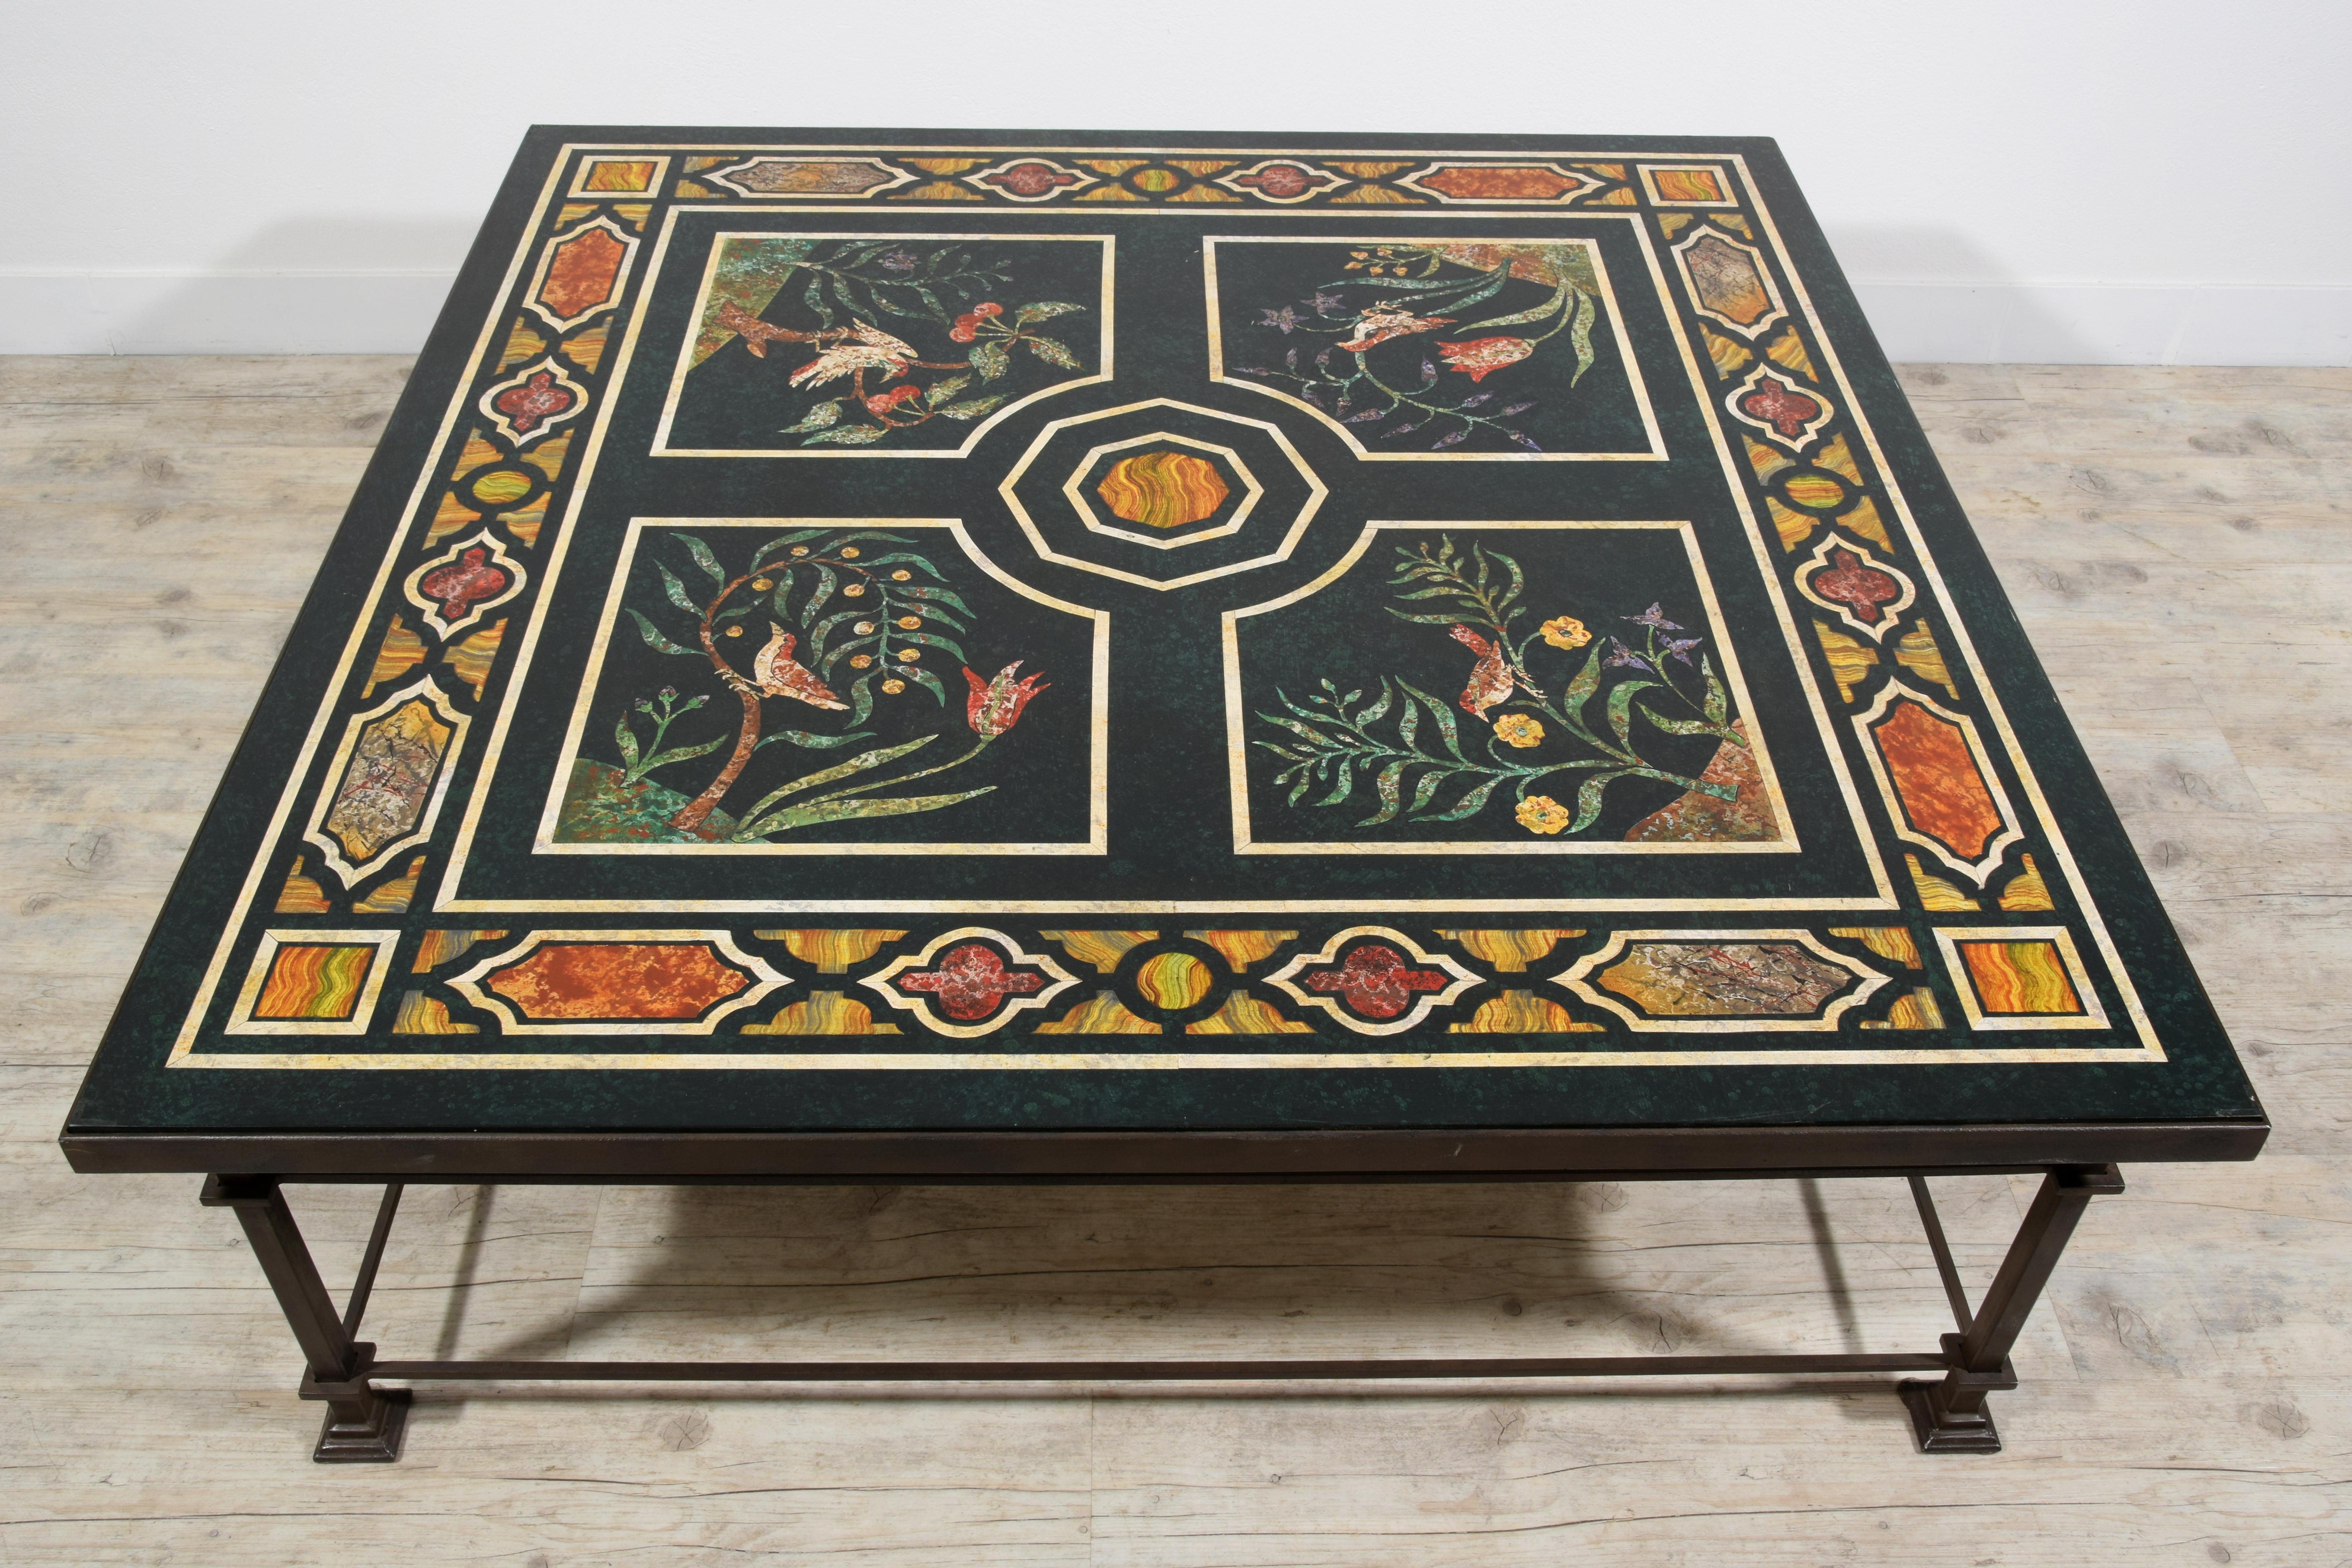 Renaissance  XXth Century, Tuscan Large Square Coffee Table with Lacquered Wood  For Sale